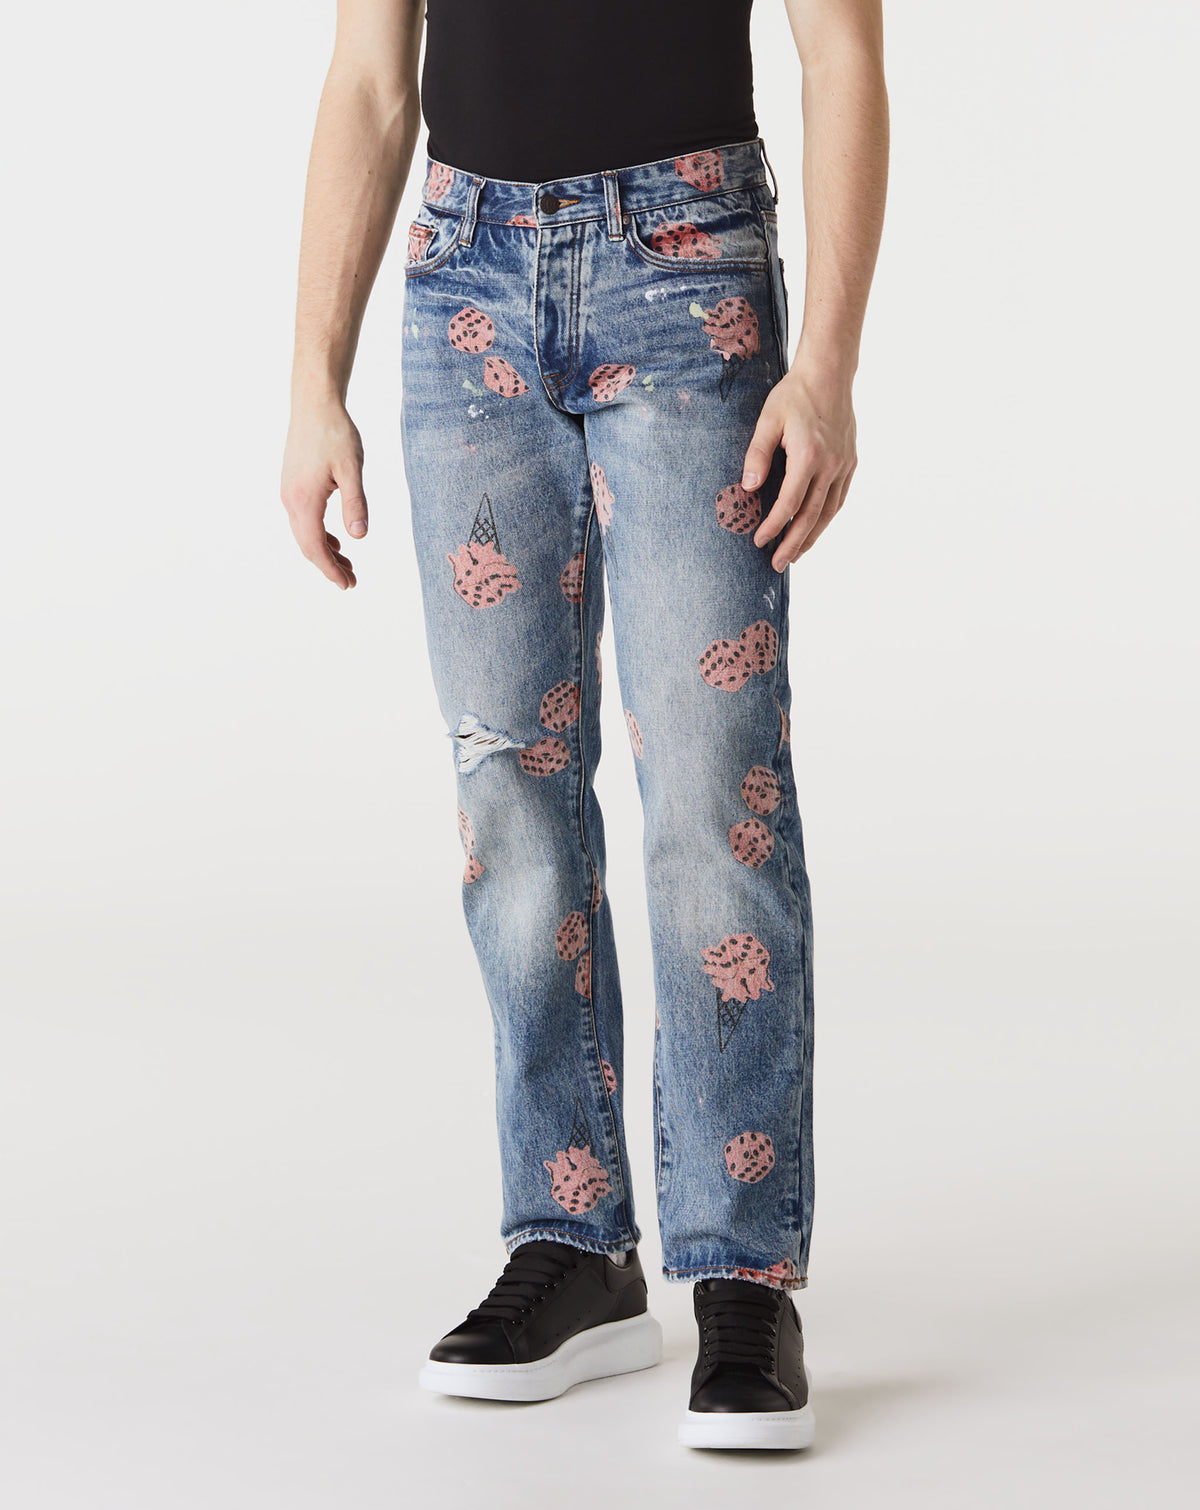 IceCream Luck Jeans - Rule of Next Apparel